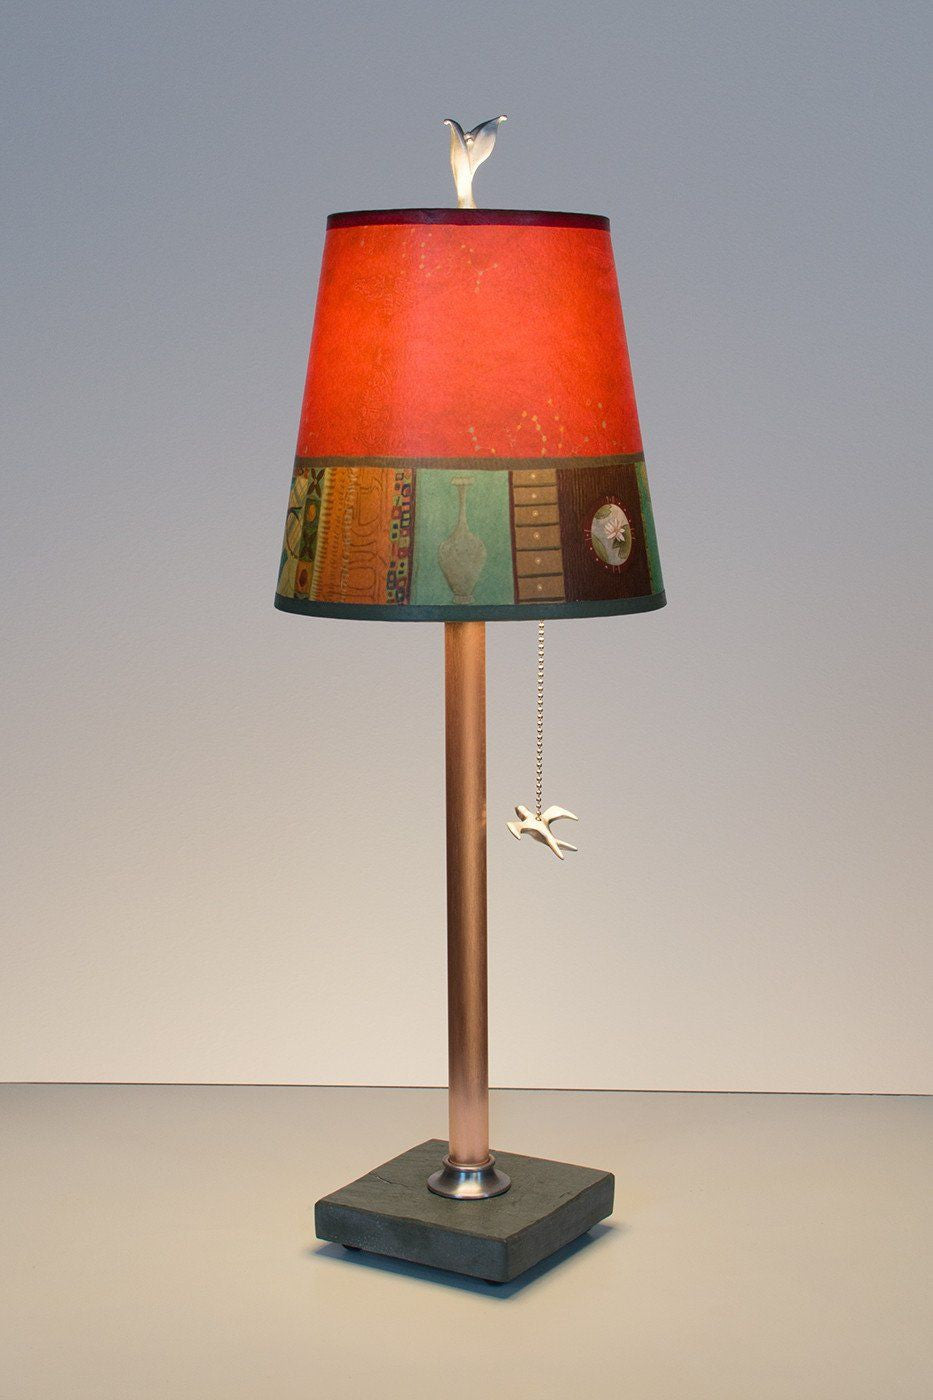 Copper Table Lamp on Vermont Slate Base with Small Drum Shade in Red Match Lit